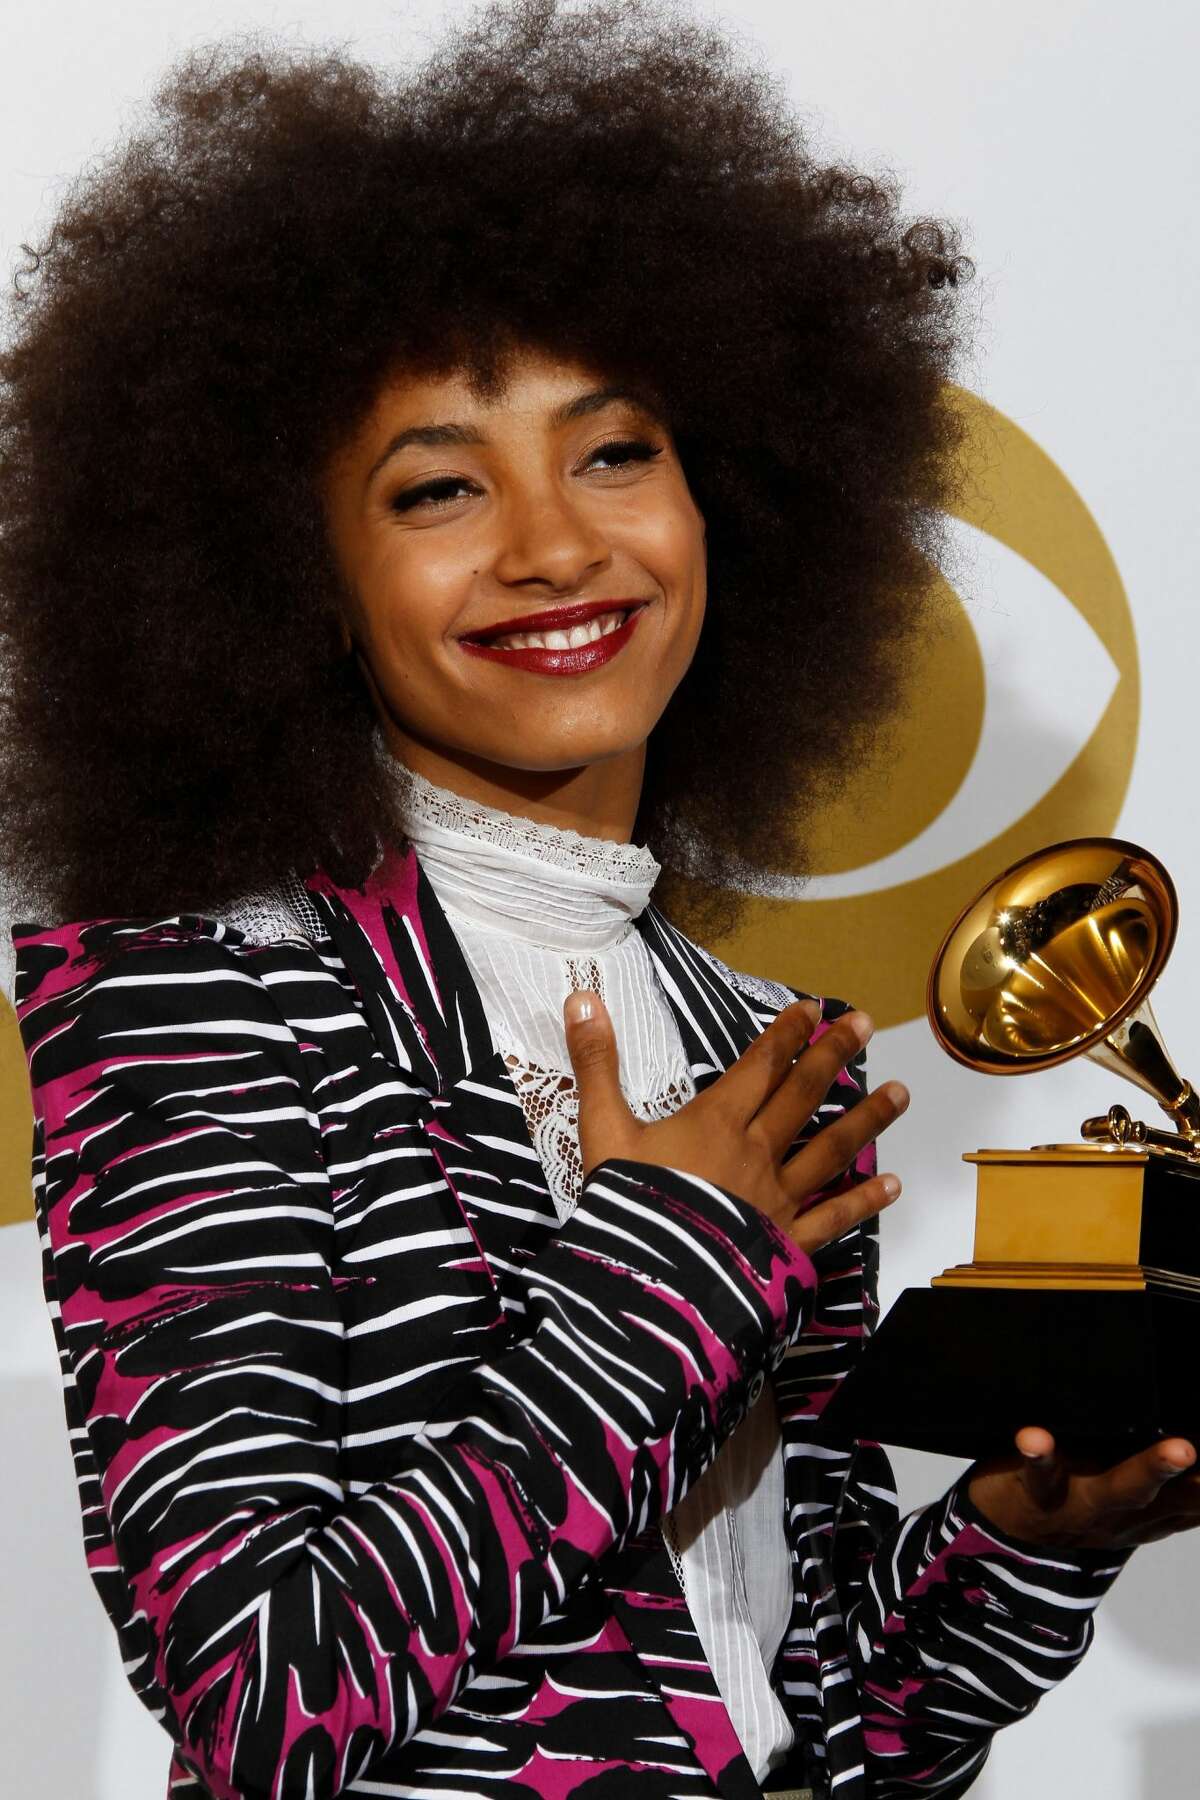 Throwback: Past Grammy winners for 'Best New Artist' and where they are now